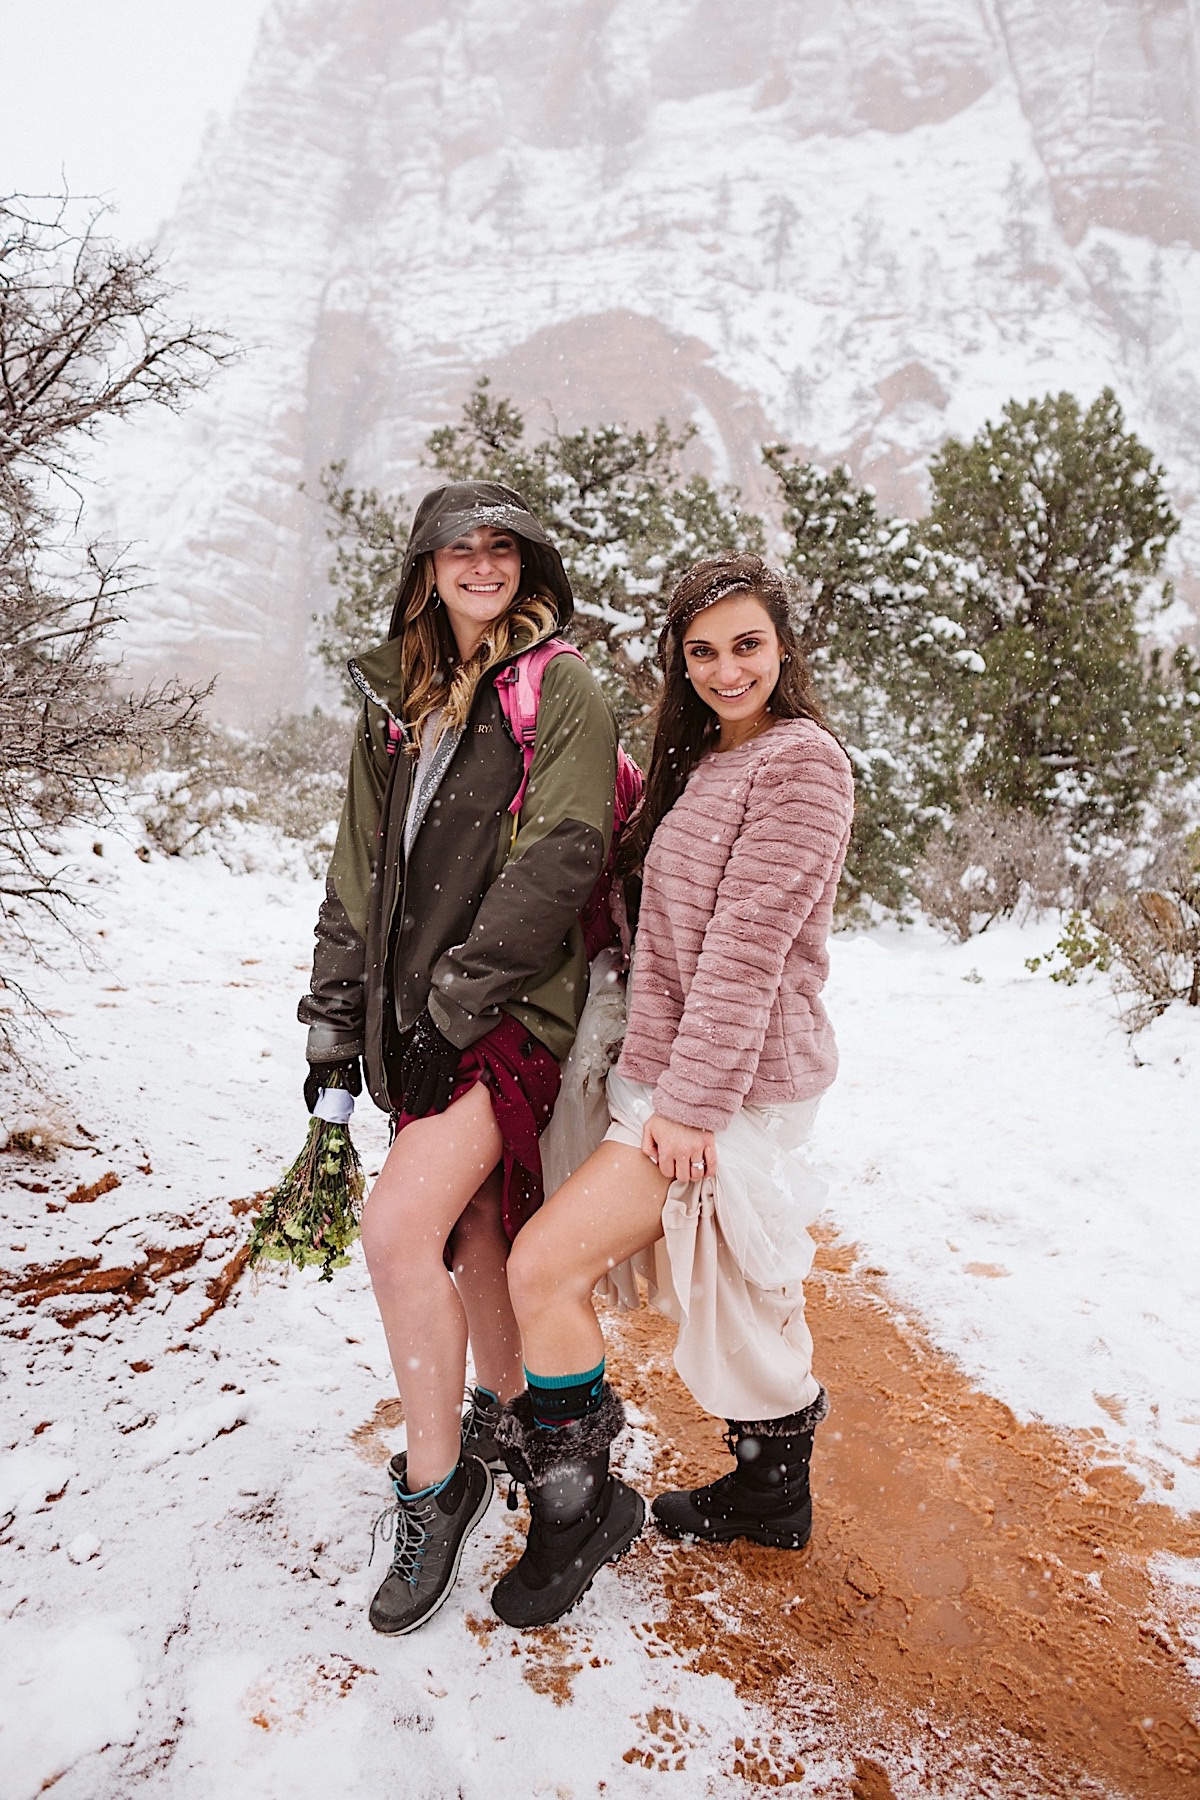 Bride and bridesmaid pull up their dress hems during snowy Zion hike to reveal their hiking boots.